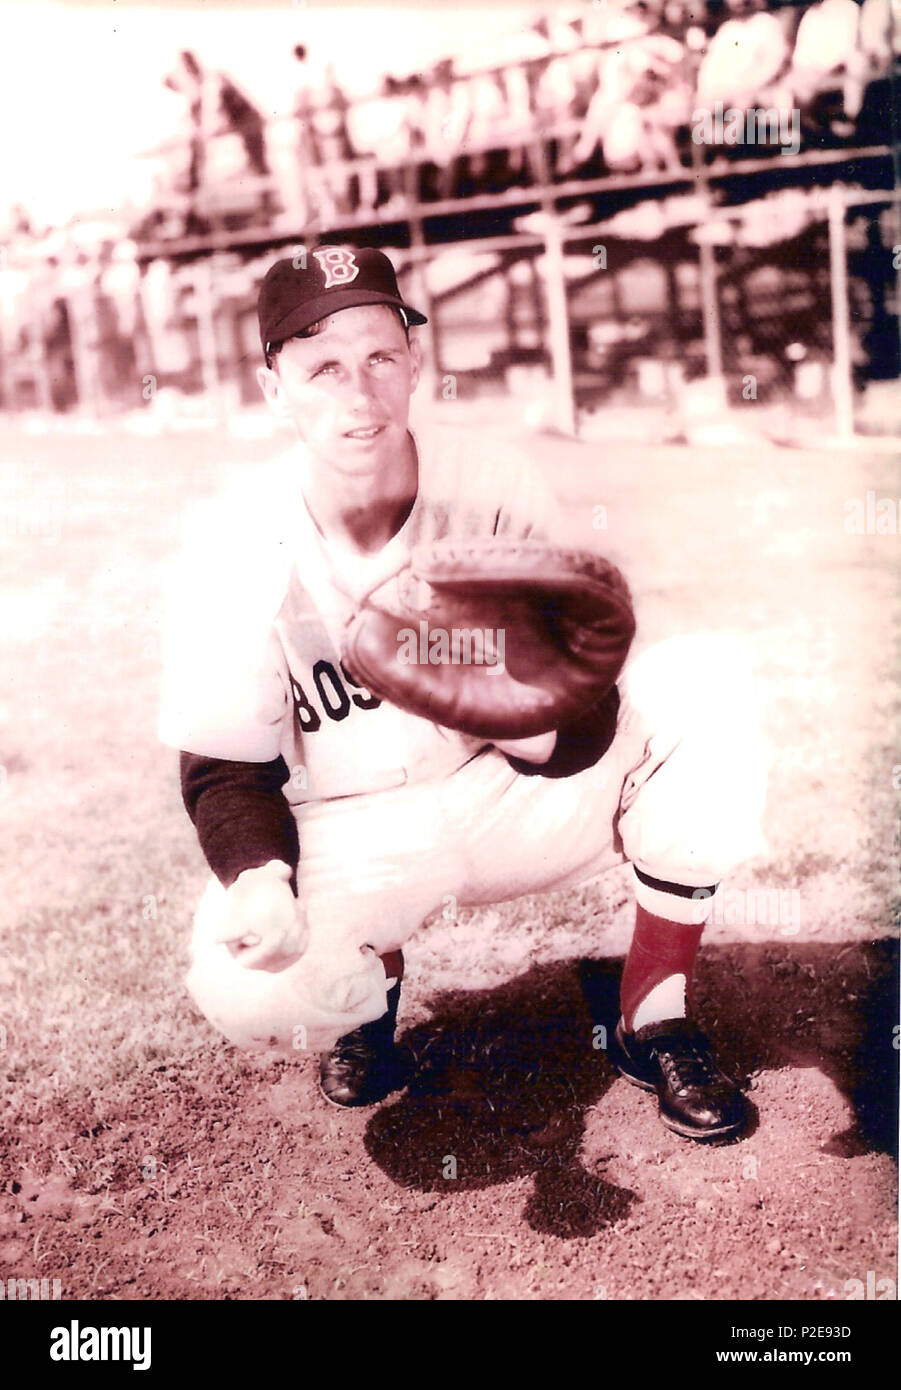 . English: Samuel Charles White (July 7, 1928 - August 5, 1991) was a Major League Baseball catcher and right-handed batter who played with the Boston Red Sox (1951-59), Milwaukee Braves (1961) and Philadelphia Phillies (1962). 1952. Boston Red Sox staff photographer 50 Samuel Charles White Stock Photo